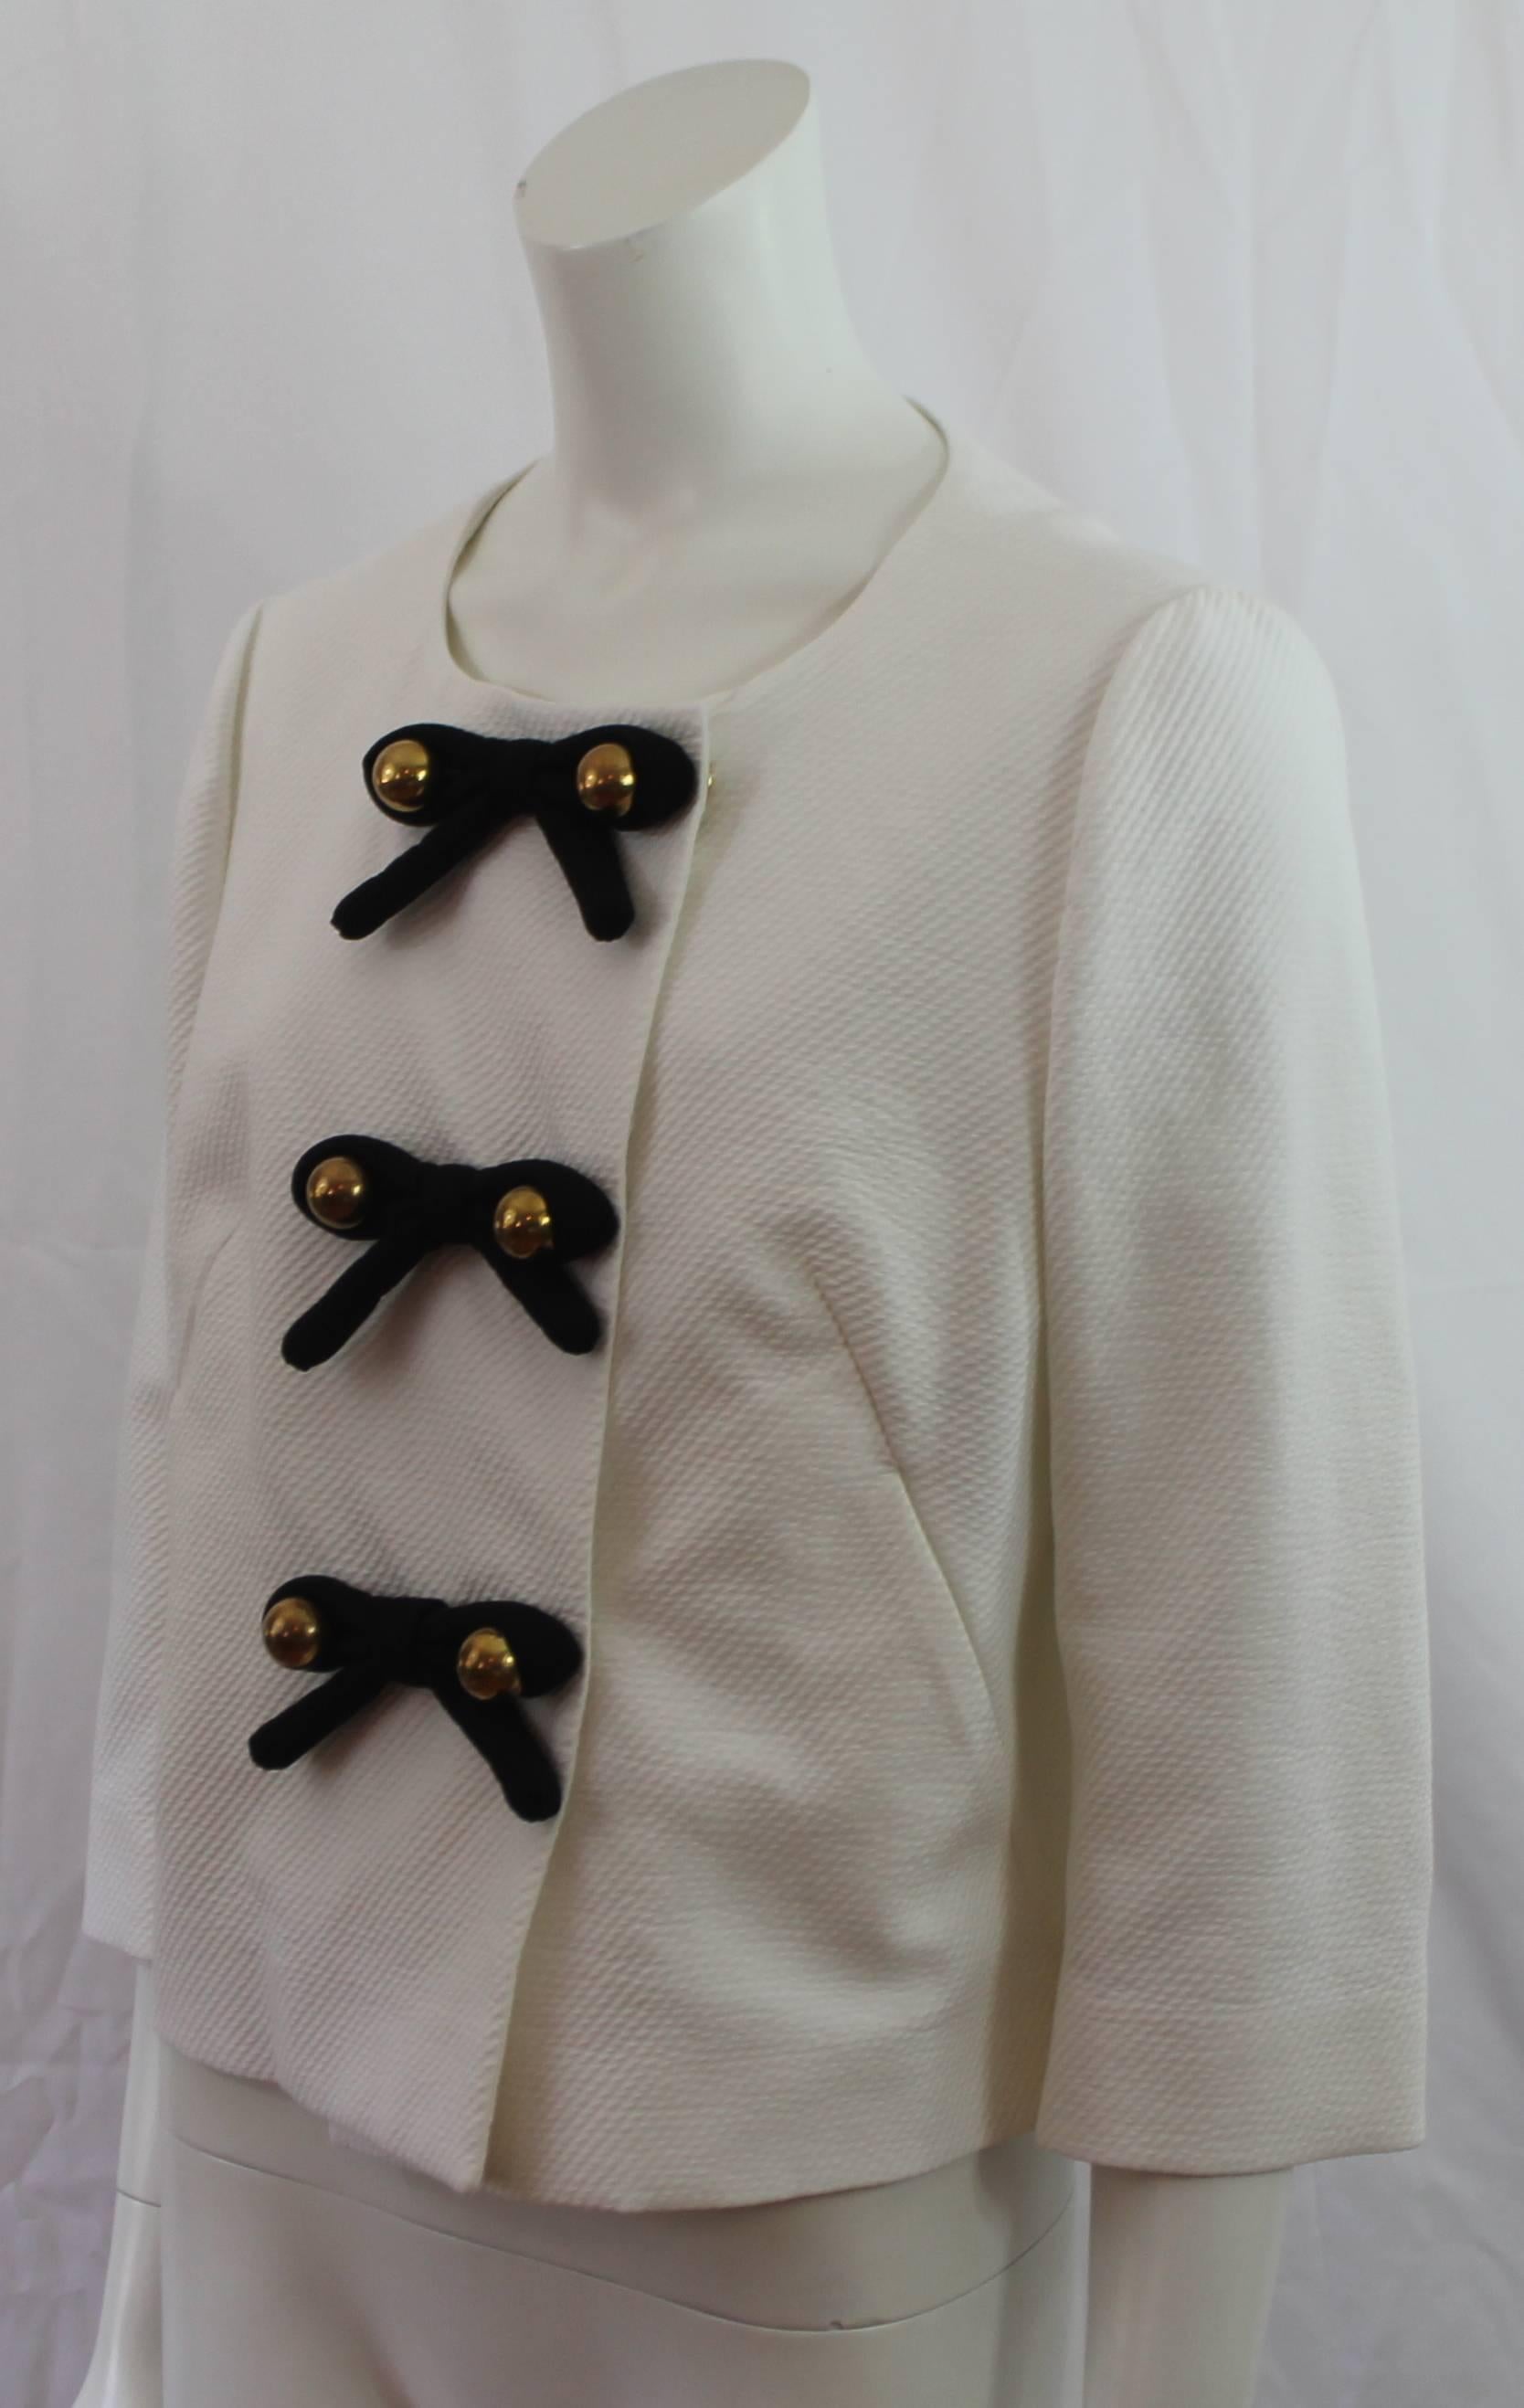 Moschino C&C White Cotton Jacket with Bow Detail - M. This seersucker jacket is a classic piece and features 3 black bows with gold bead detailing, snap closures, 2 pockets, a bracelet sleeve, and a round neckline. It is in excellent condition with